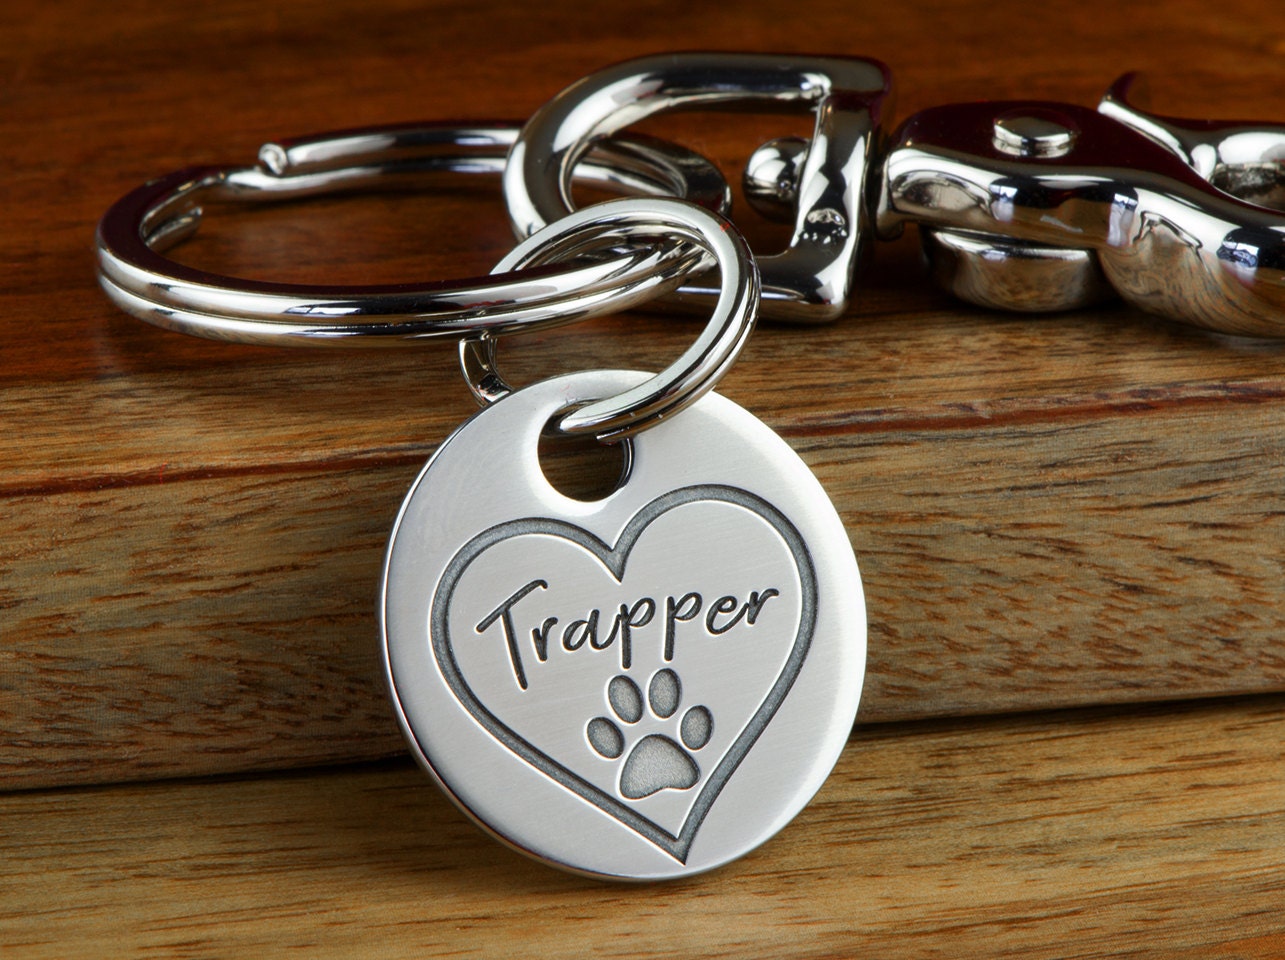 Engraved Pet Memorial Keychain Gift, Pet Loss Keychain, Pet Mom, Pet Lover Gift, Pet Remembrance, Heart Keychain, Pawprint Charm,Made in USA